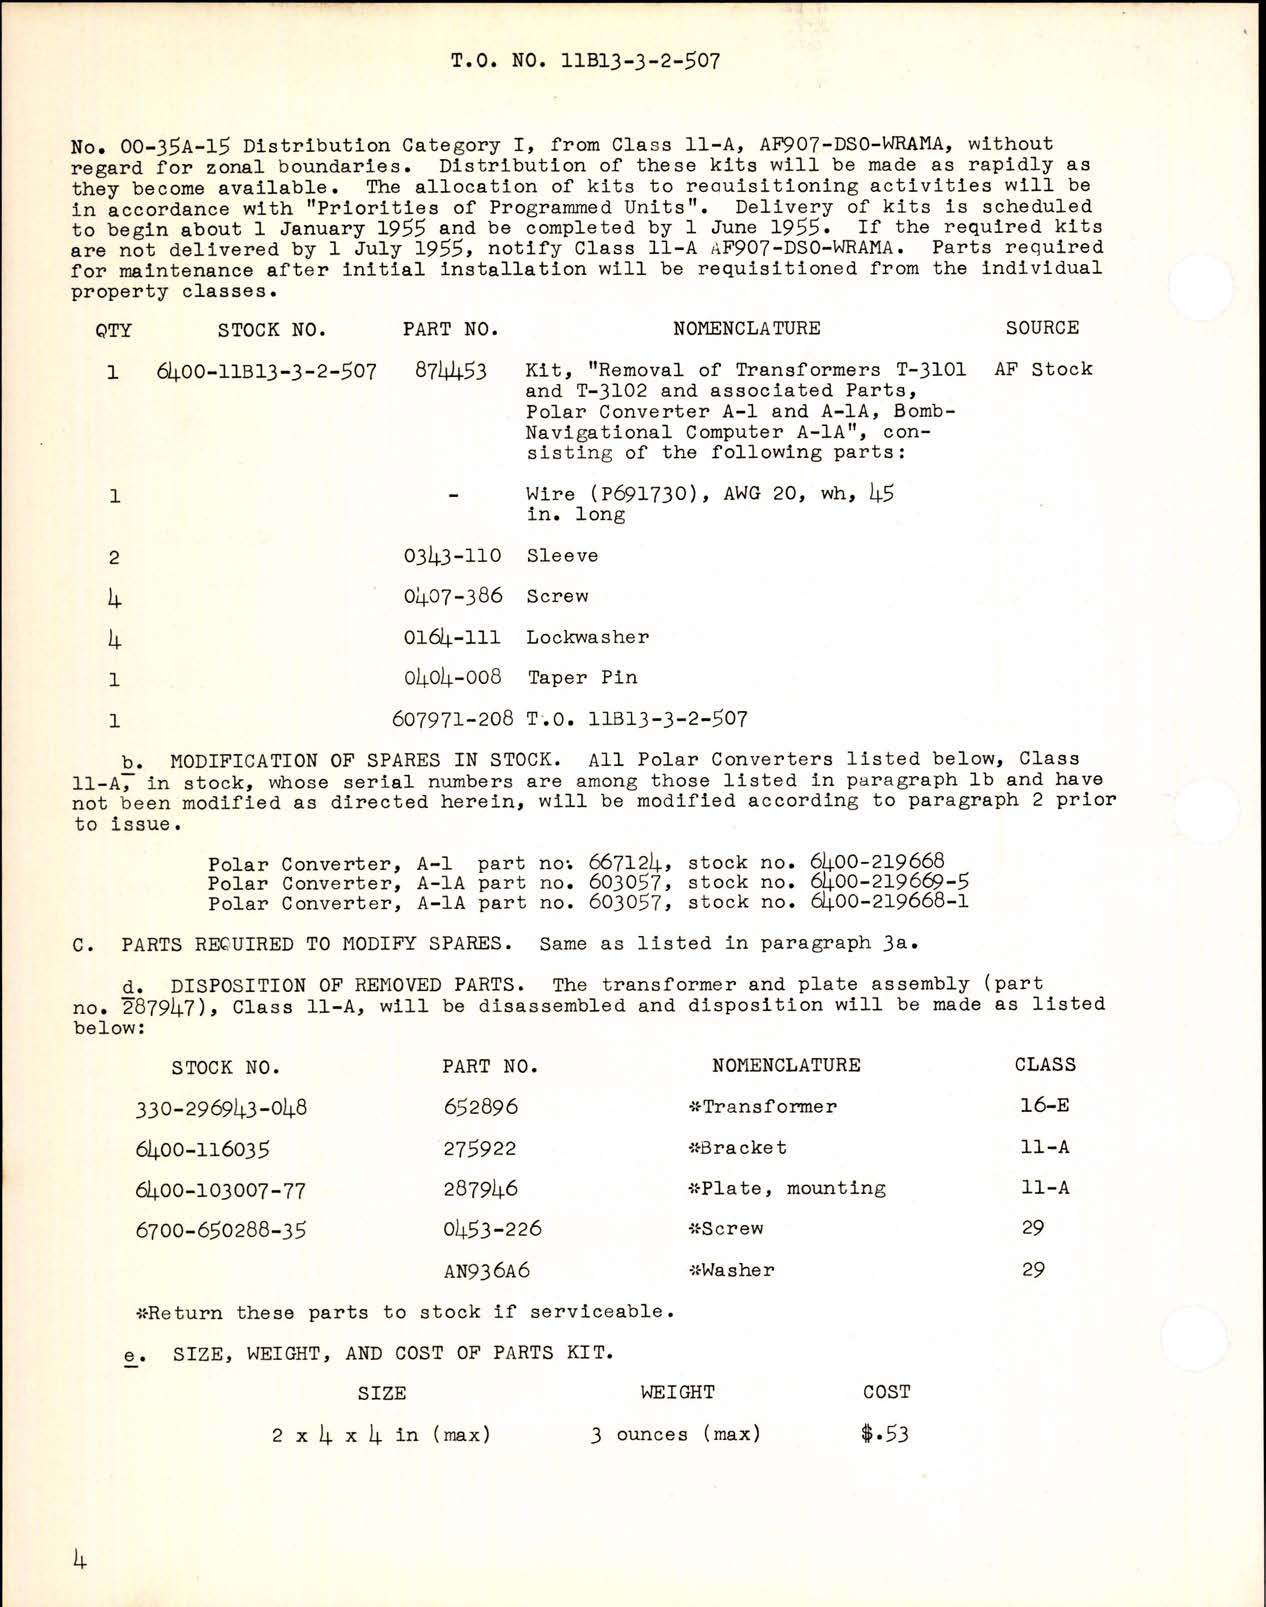 Sample page 4 from AirCorps Library document: Removal of Transformers T3101 and T3102